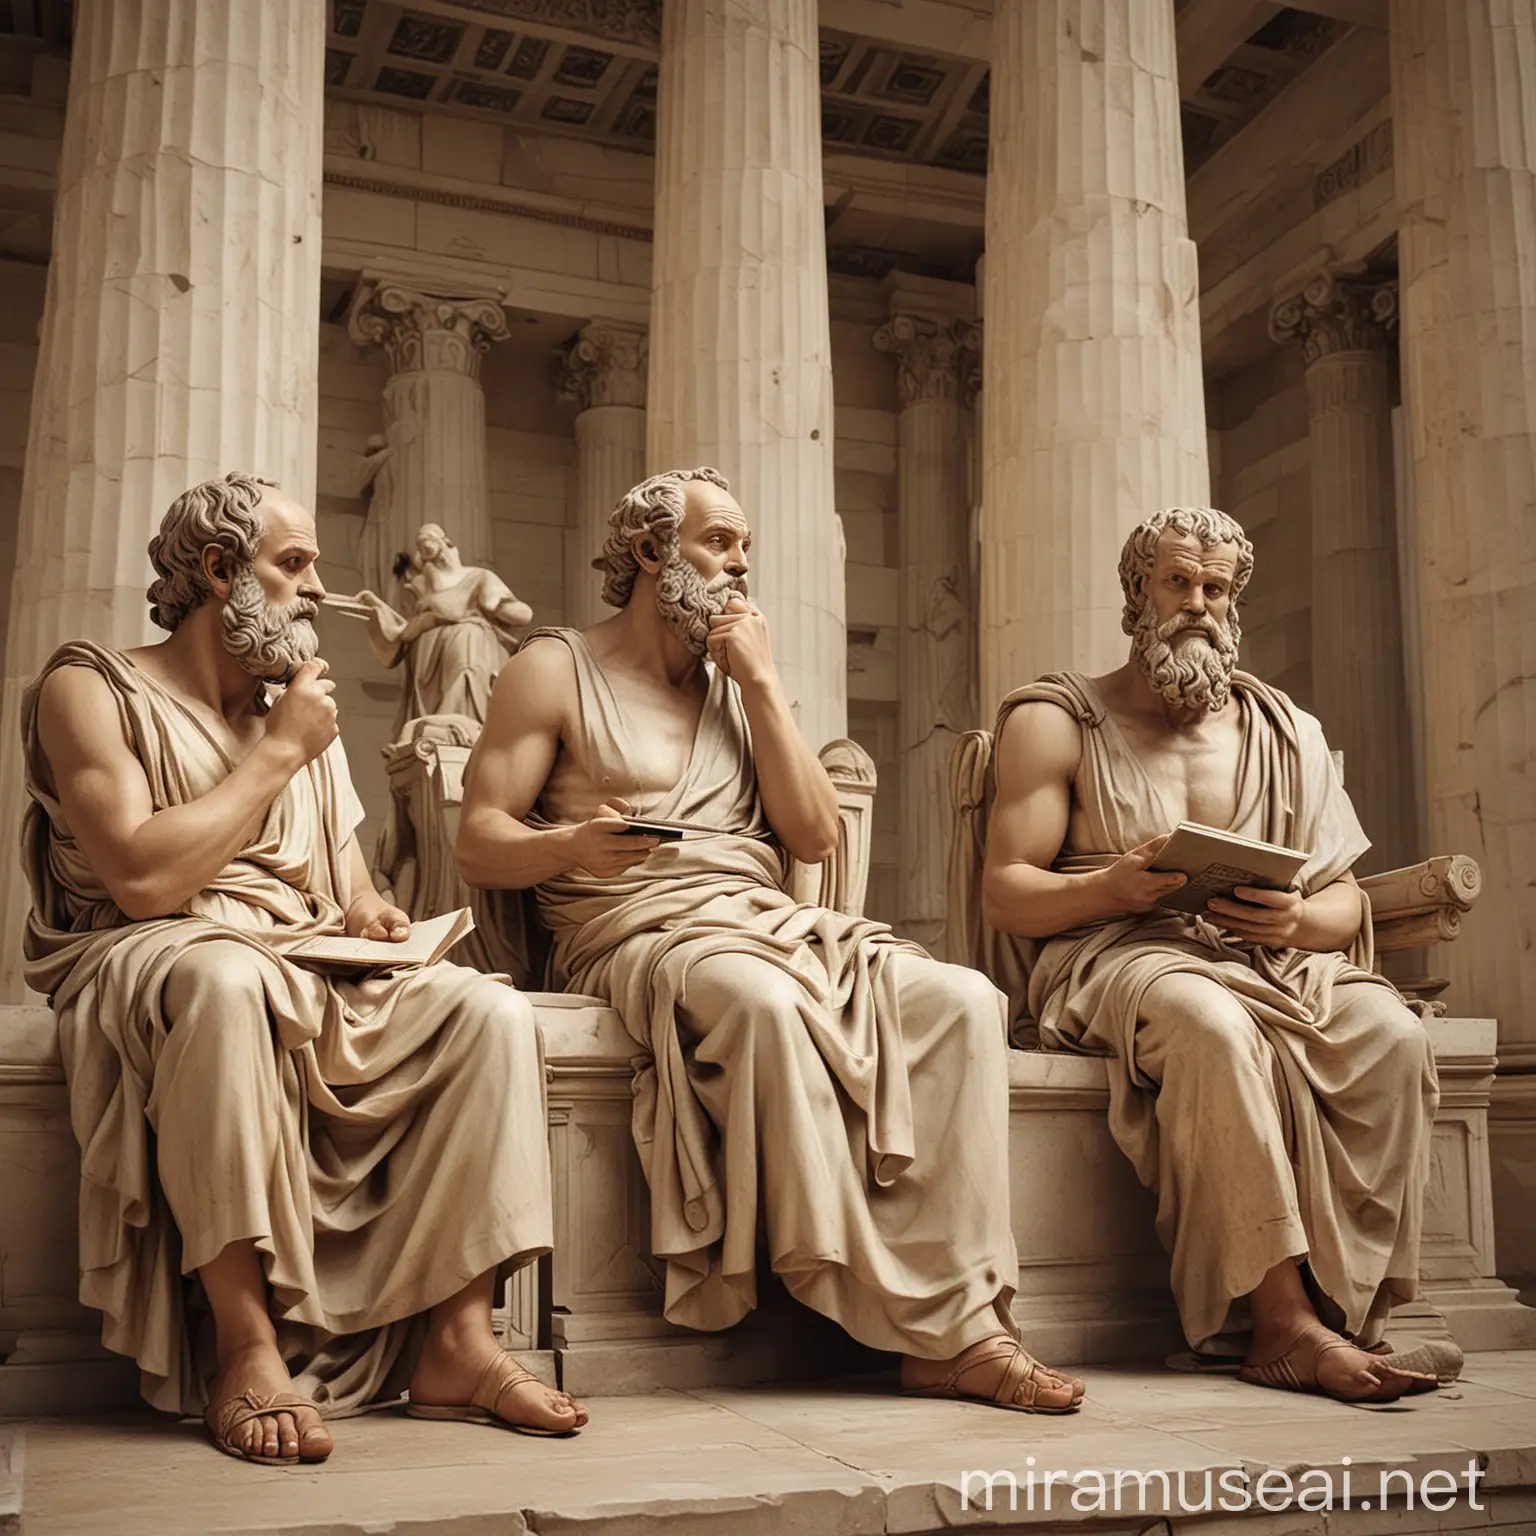 "Create a visually engaging thumbnail featuring Socrates engaging in conversation with a modern-day businessperson. Socrates should be holding a scroll, symbolizing ancient wisdom, while the businessperson is holding a tablet, representing modern technology. The background should blend elements of ancient Greece, like columns or the Parthenon, with a contemporary office setting. Include the text 'Socrates: Master of Persuasion and Sales' in a clear, bold font."

